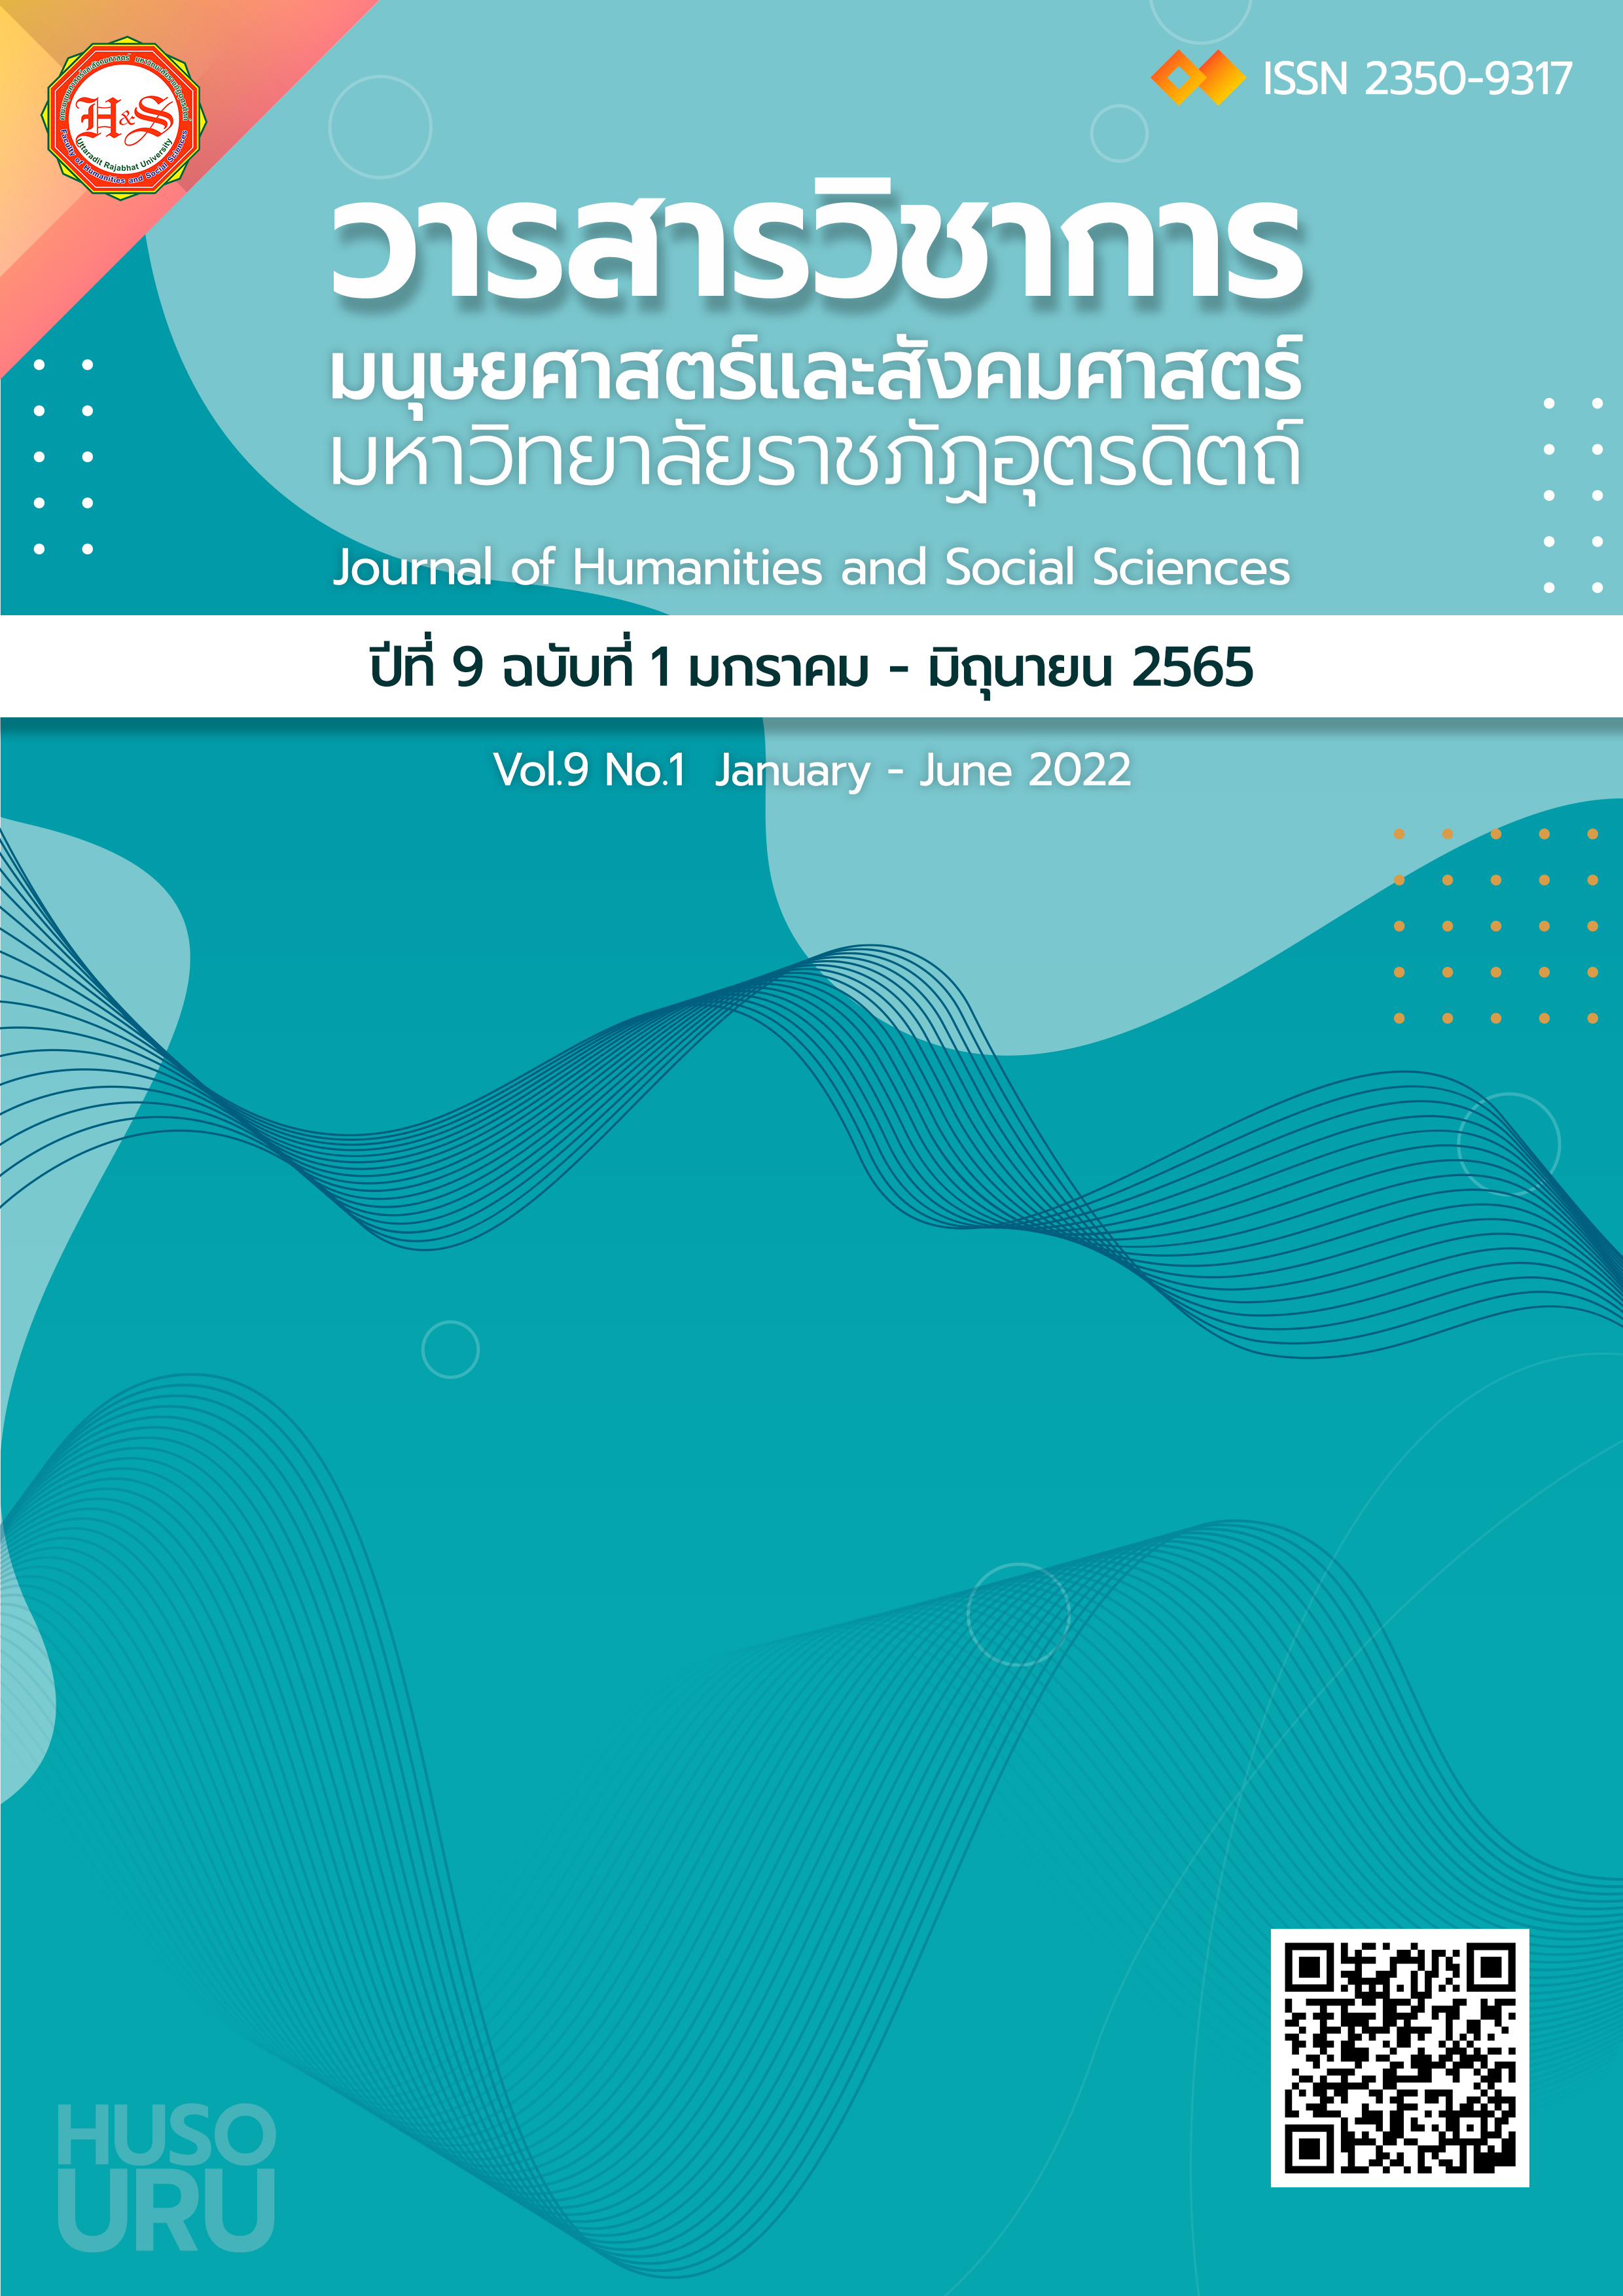 					View Vol. 9 No. 1 (2022): Journal of Humanities and Social Sciences 
				